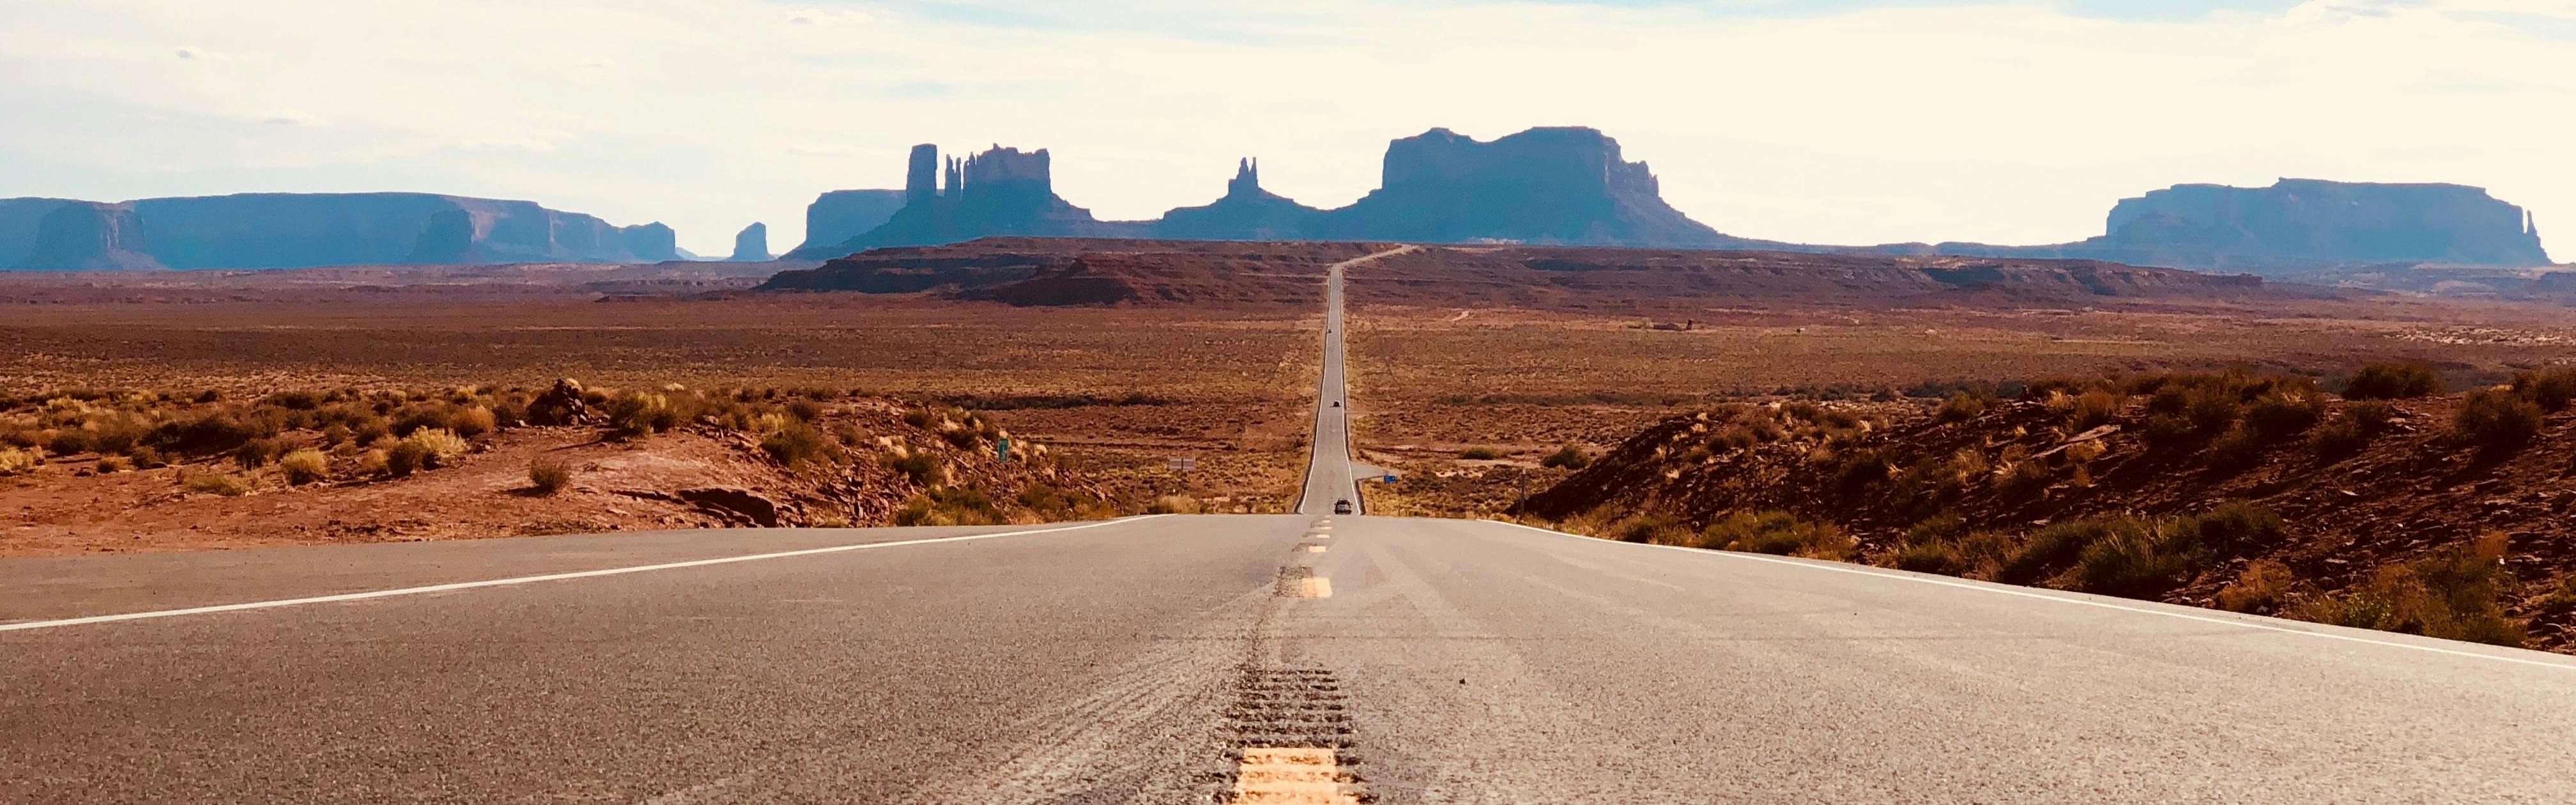 A straight road extends into the distance where buttes and mesas rise up.